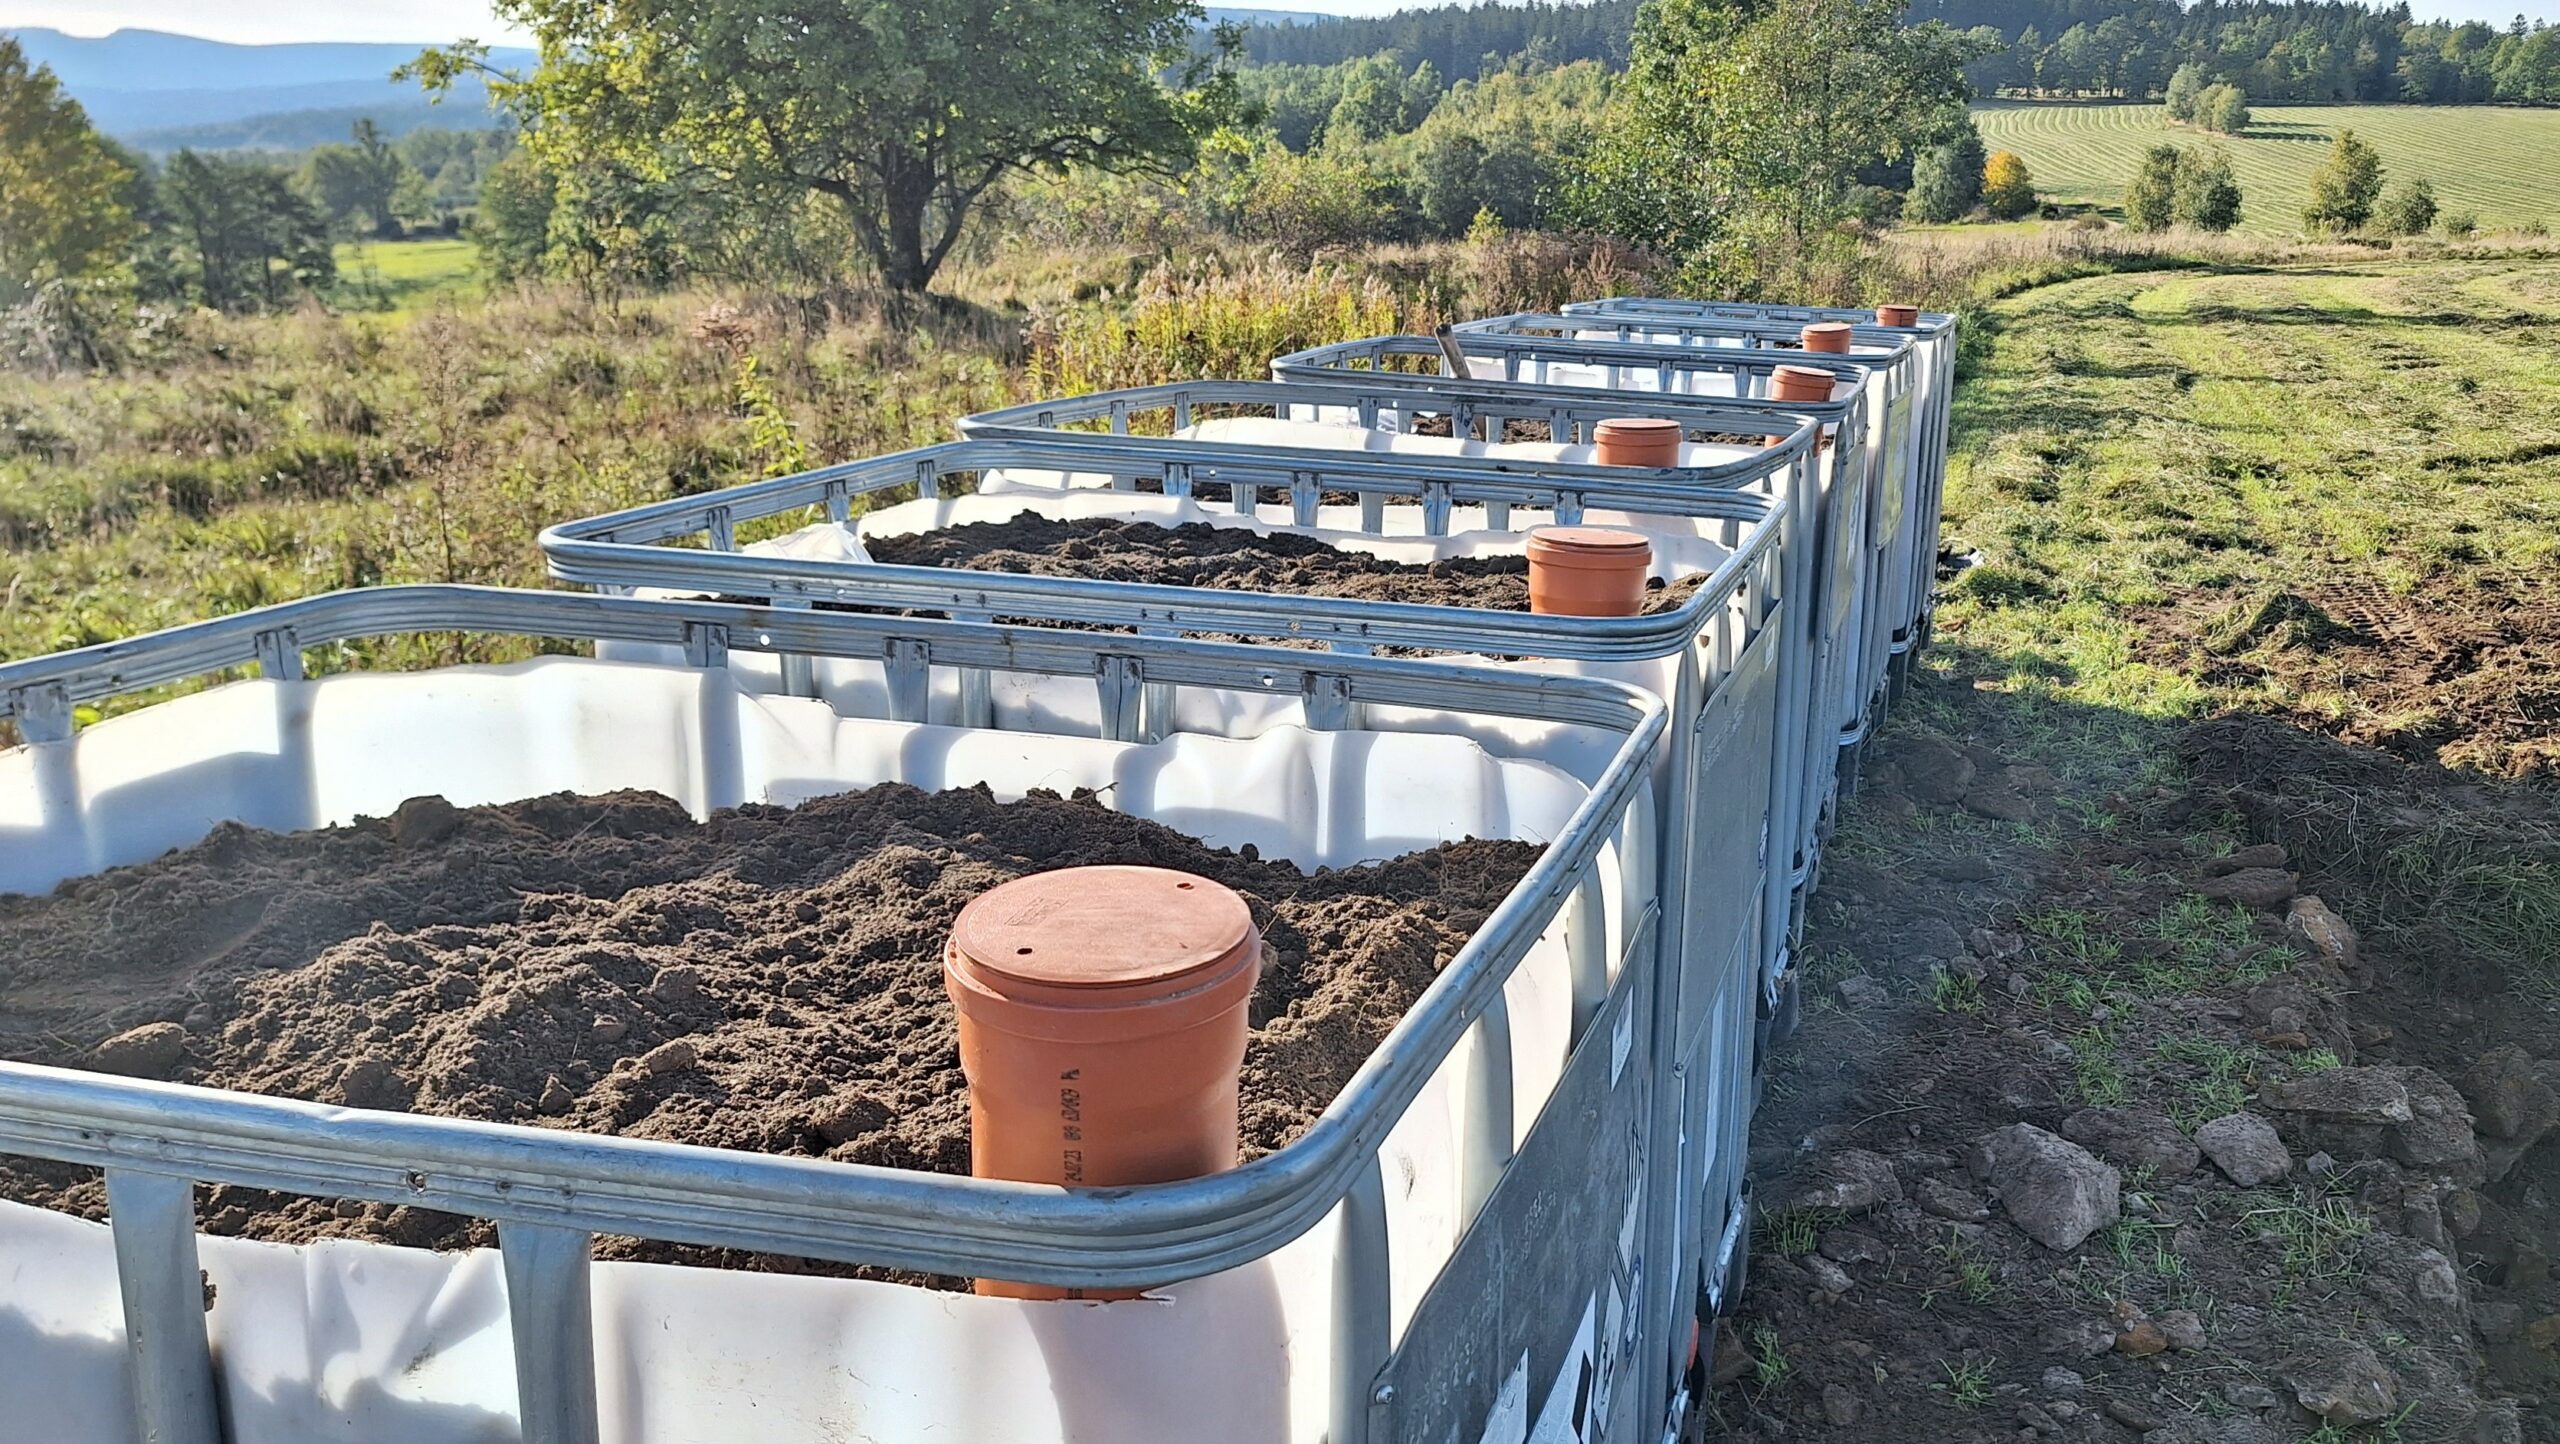 Start of the mesocosm research